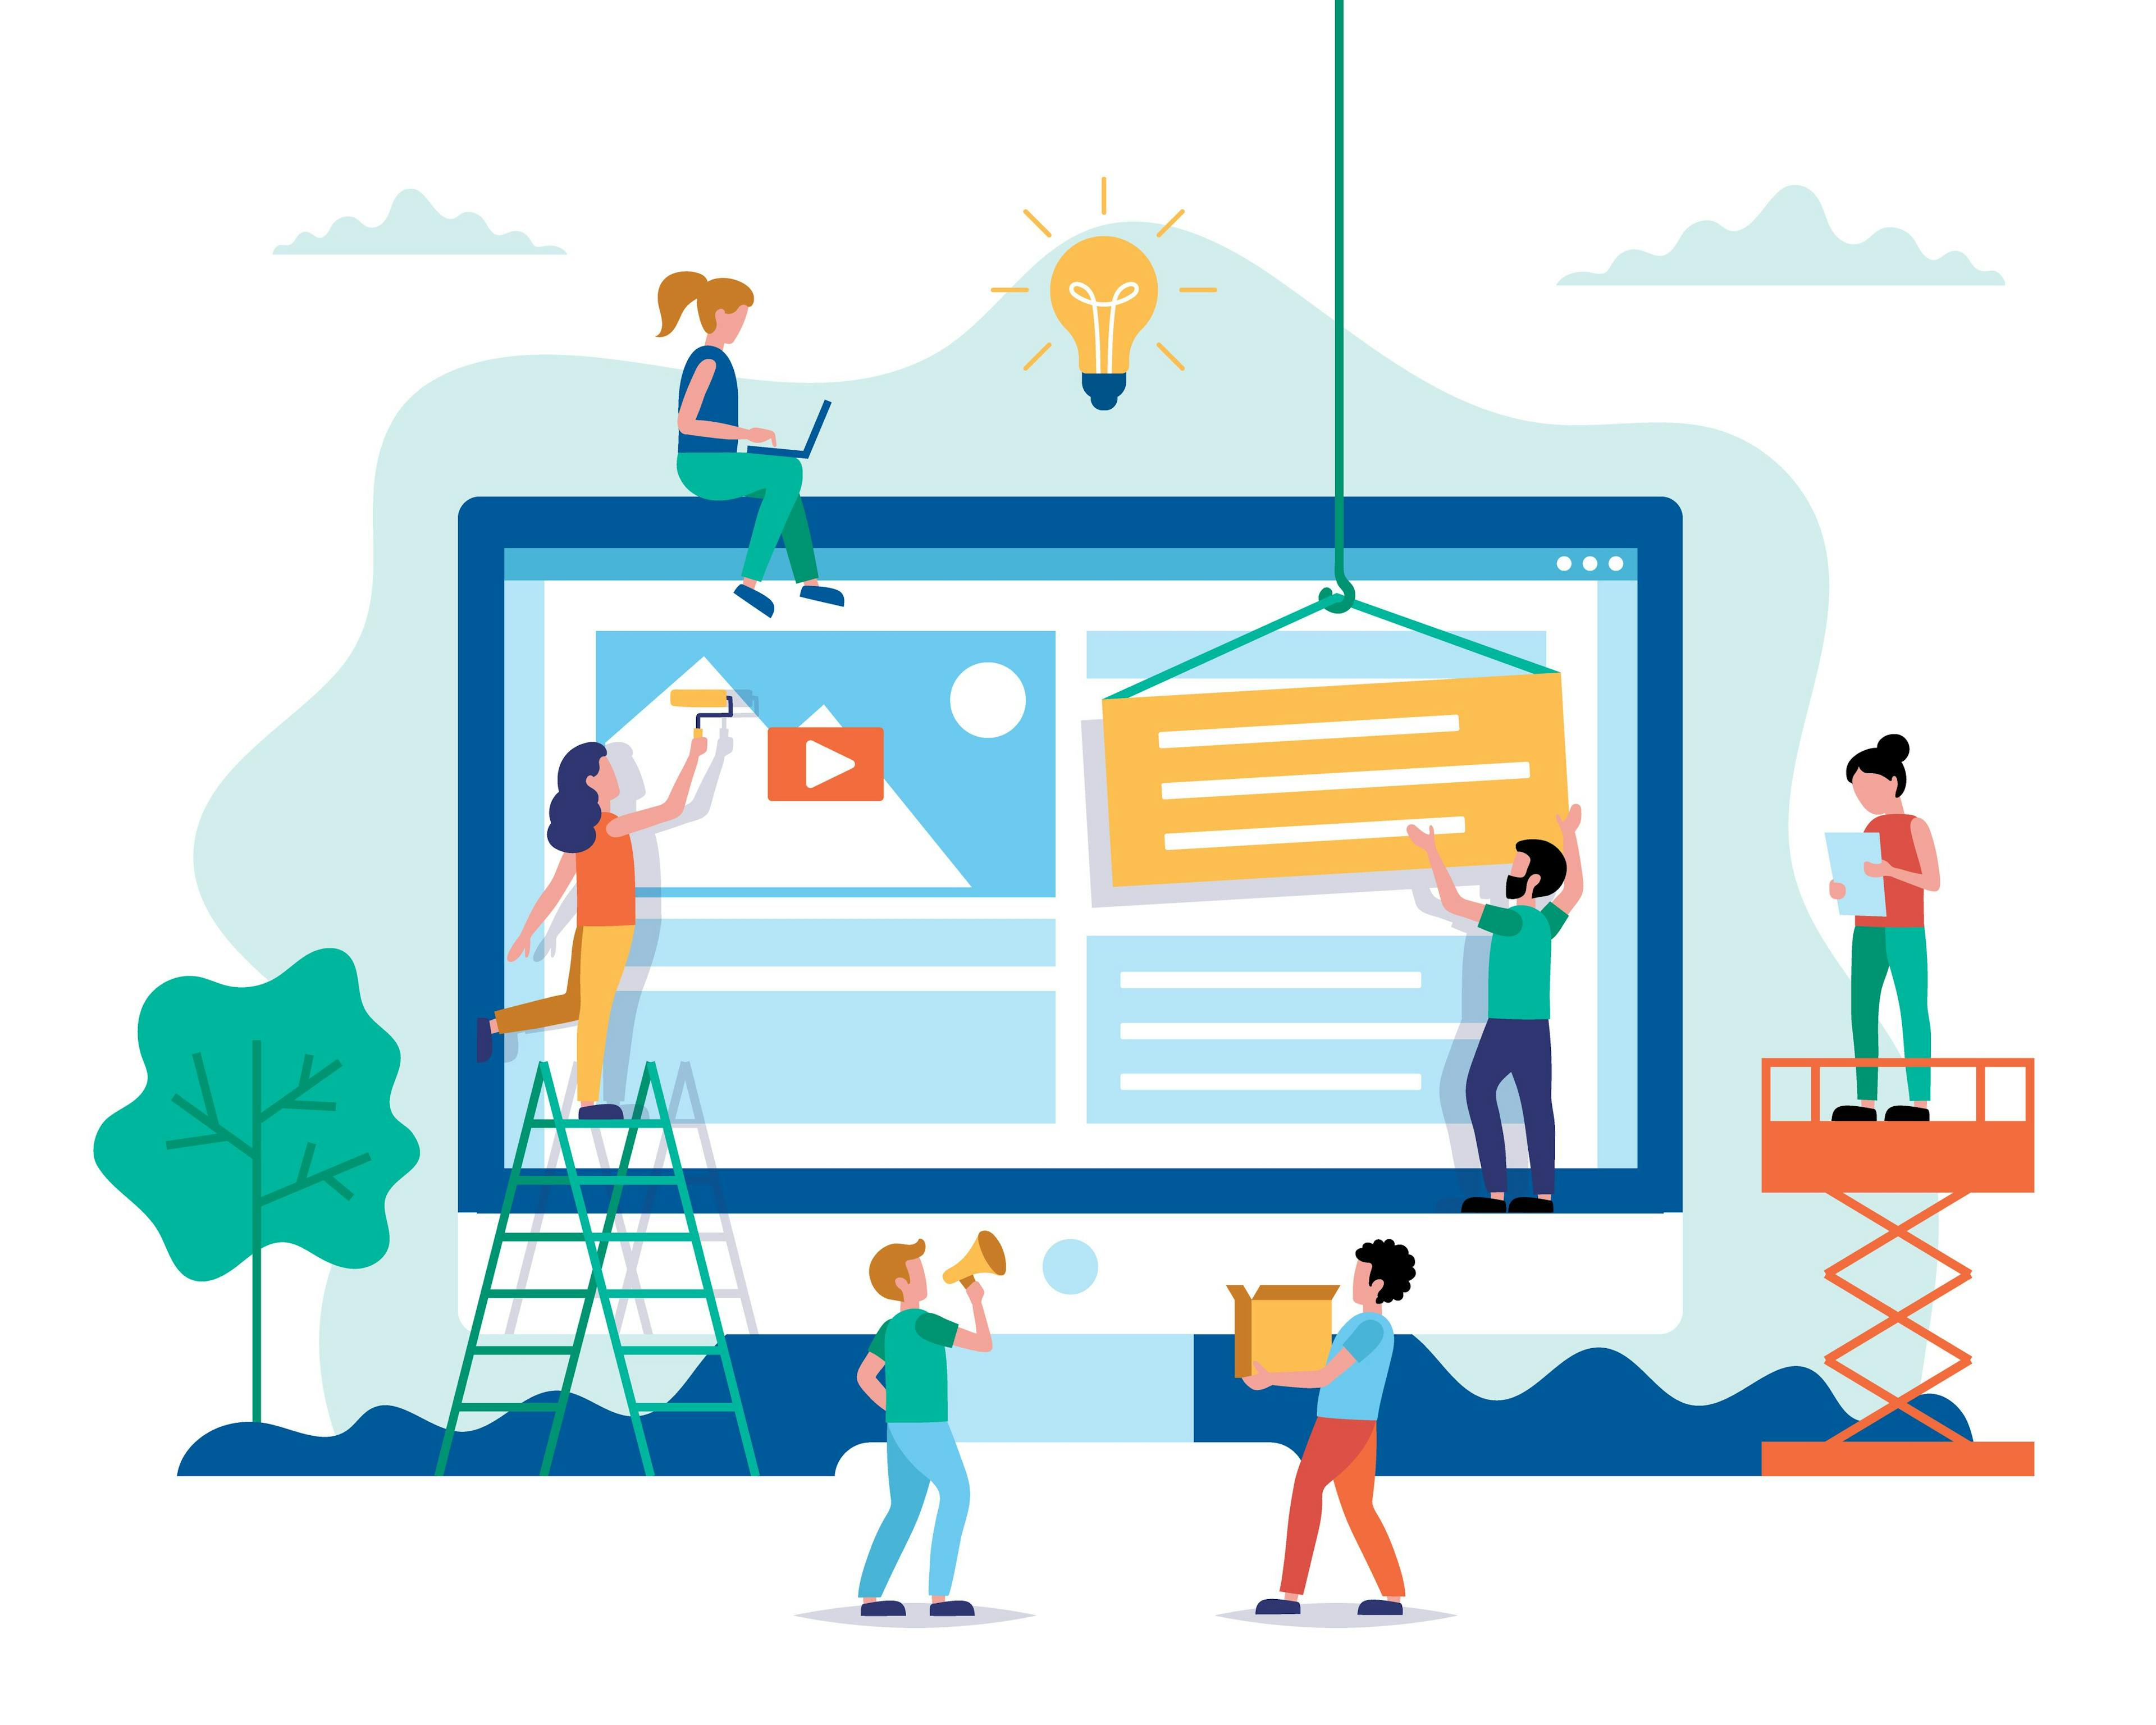 Website design - building a website, working on layout. Small people characters doing various tasks. Concept vector illustration in flat style.